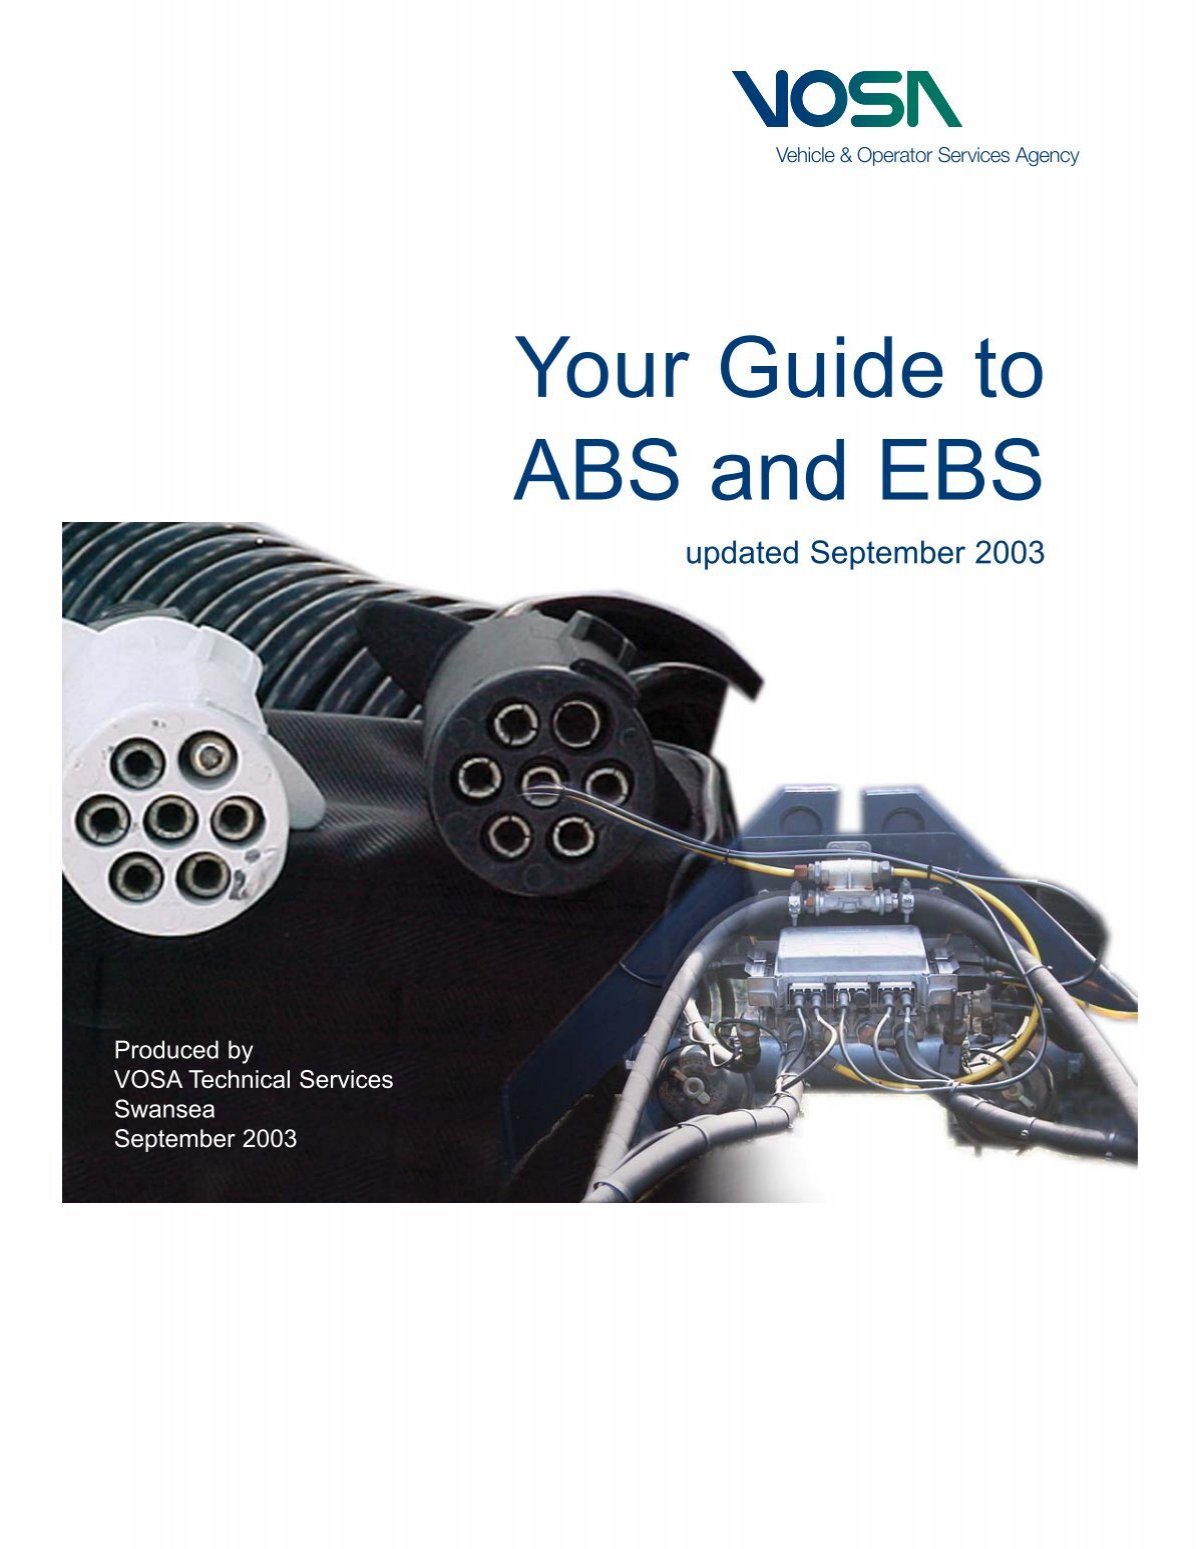 Your Guide to ABS and EBS